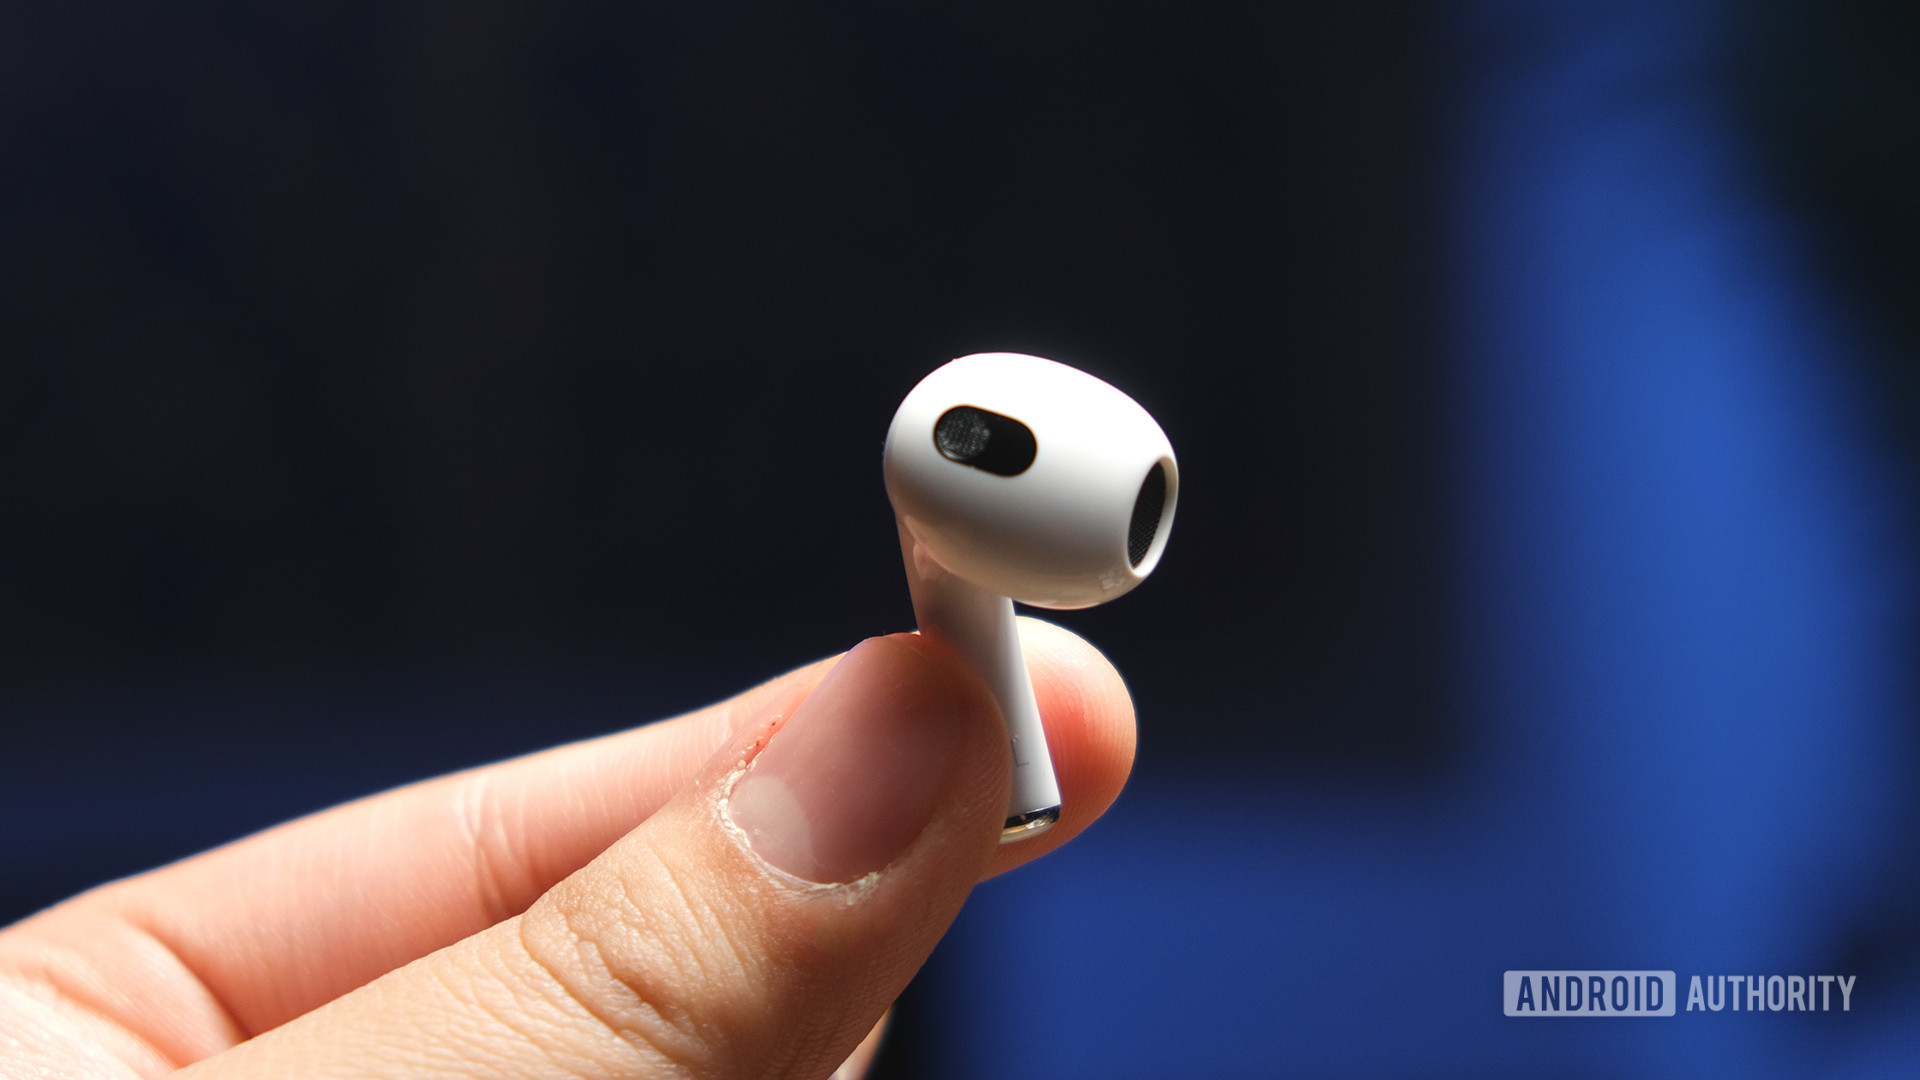 A hand holds a Apple AirPods (3rd generation) earbud by the stem to reveal the open-type fit and embedded sensors.